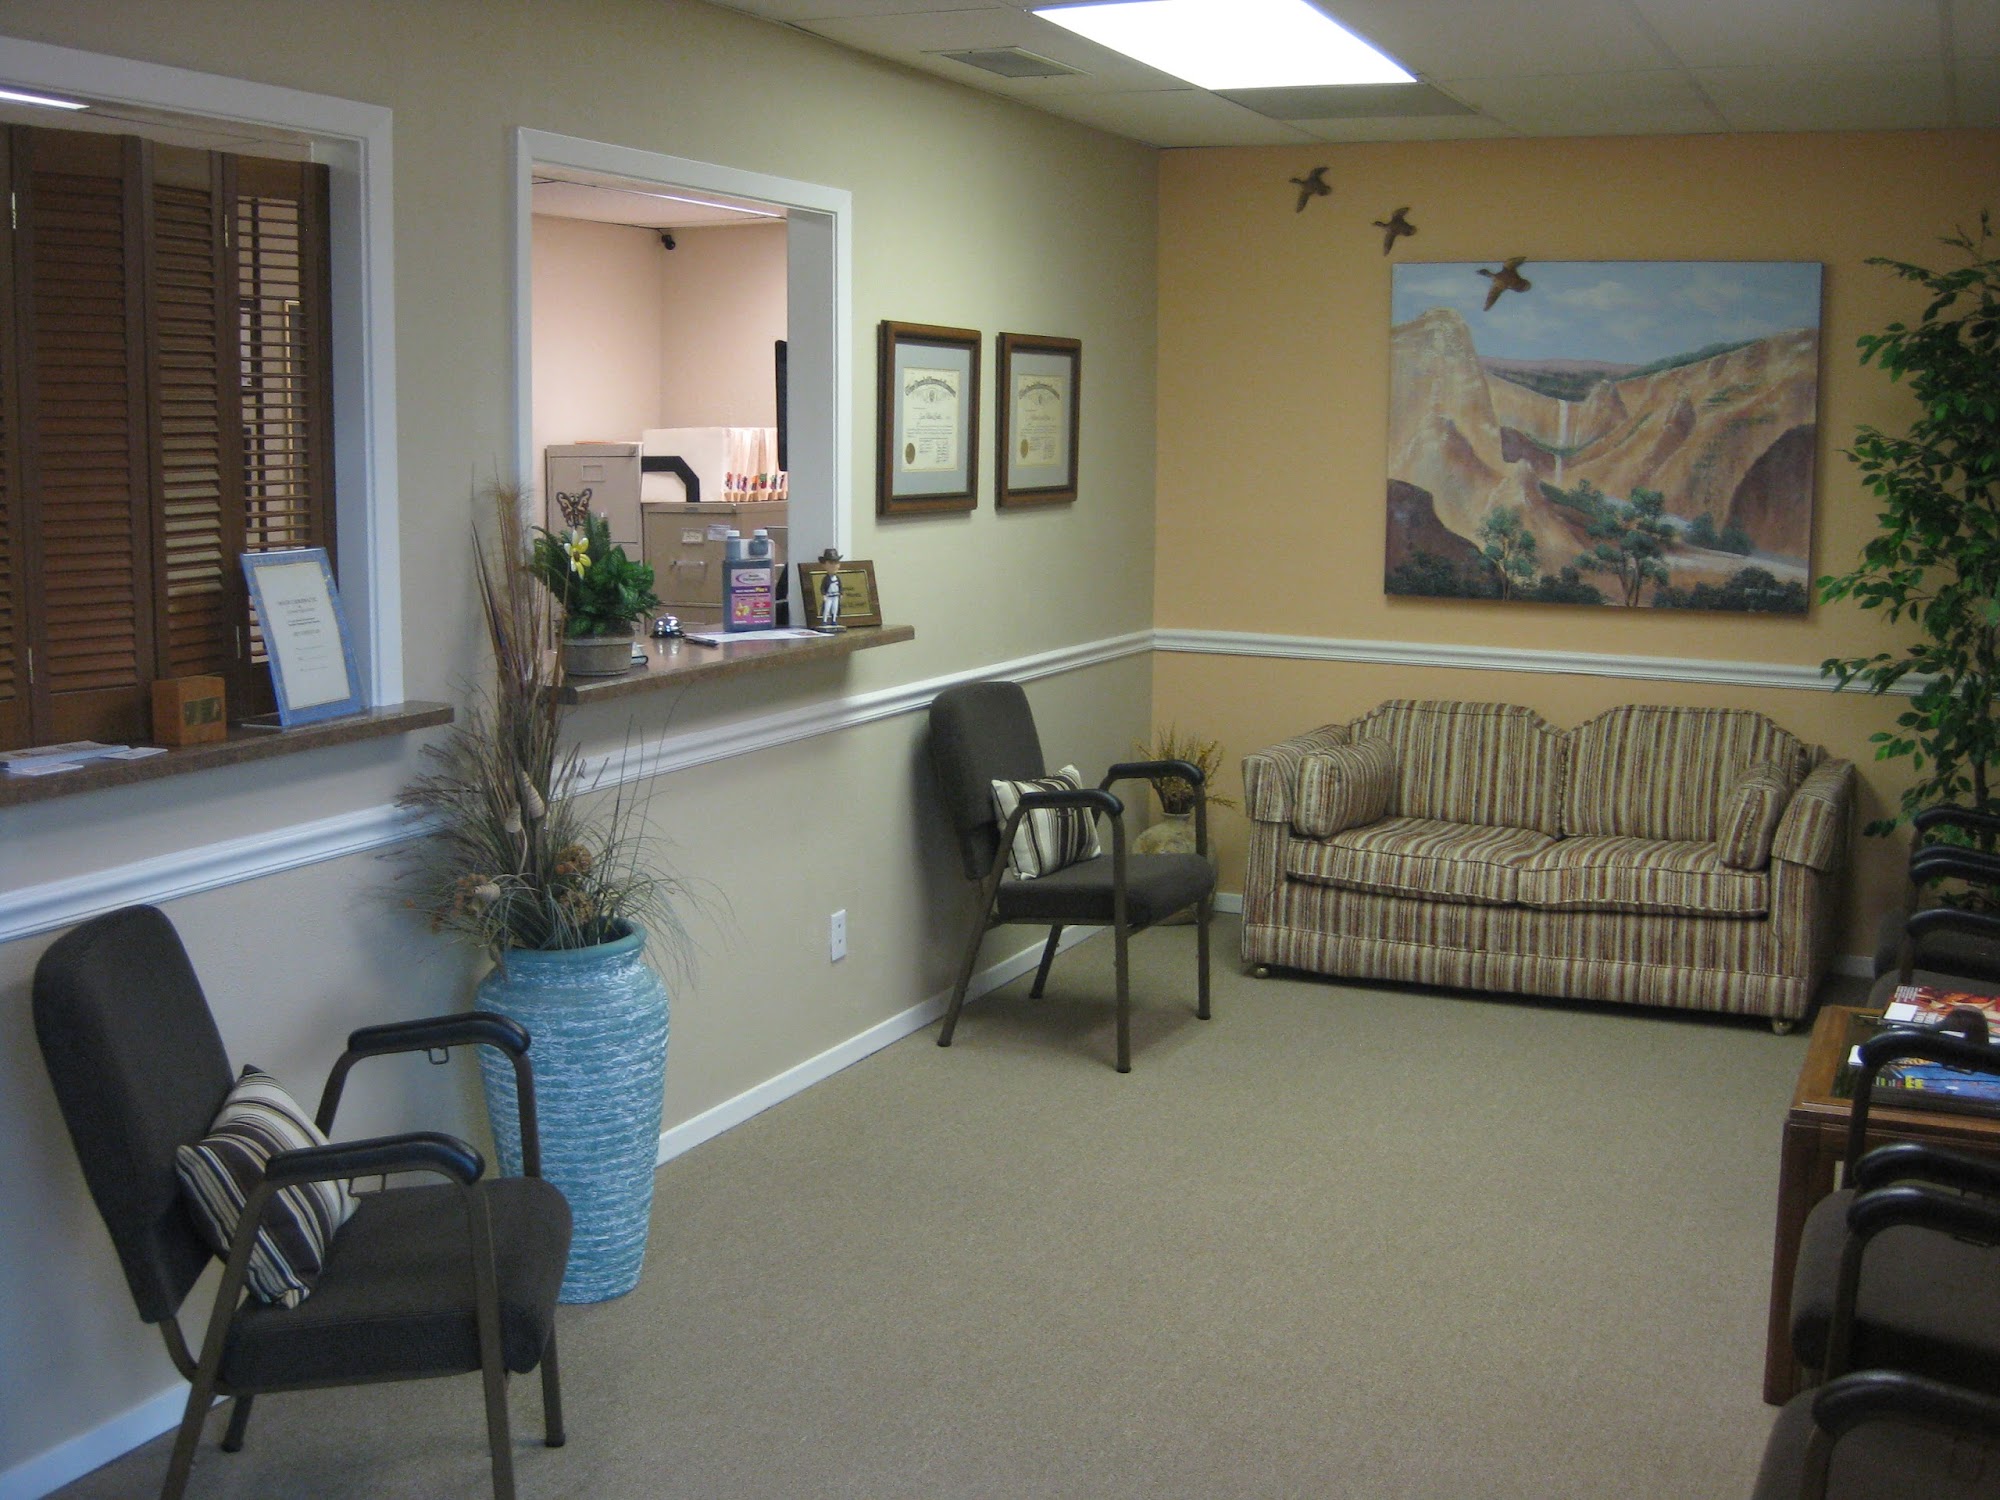 Booth Chiropractic & Acupuncture